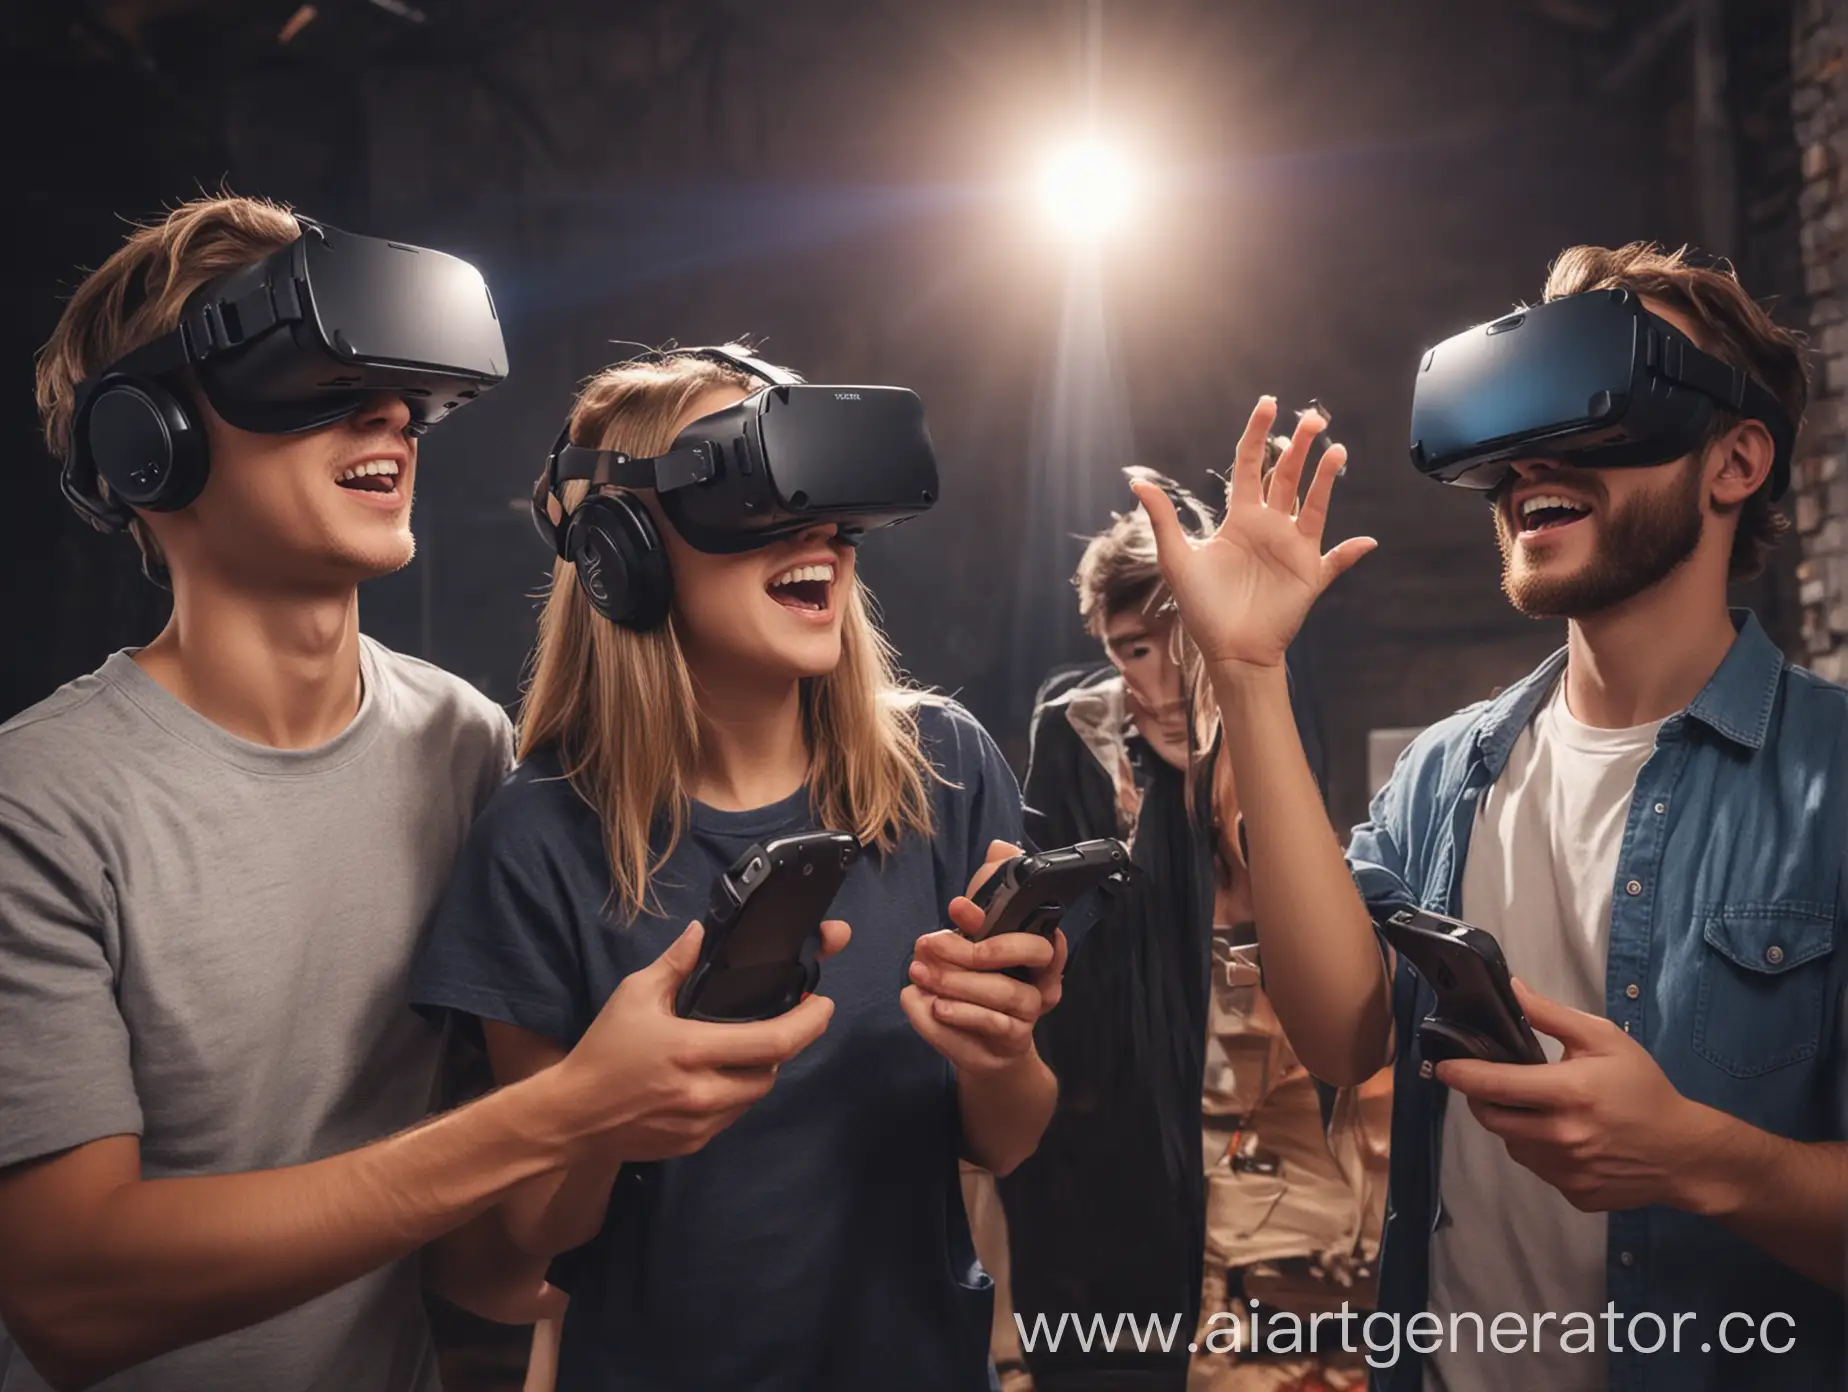 Virtual-Reality-Adventure-with-Friends-Exciting-Virtual-World-Exploration